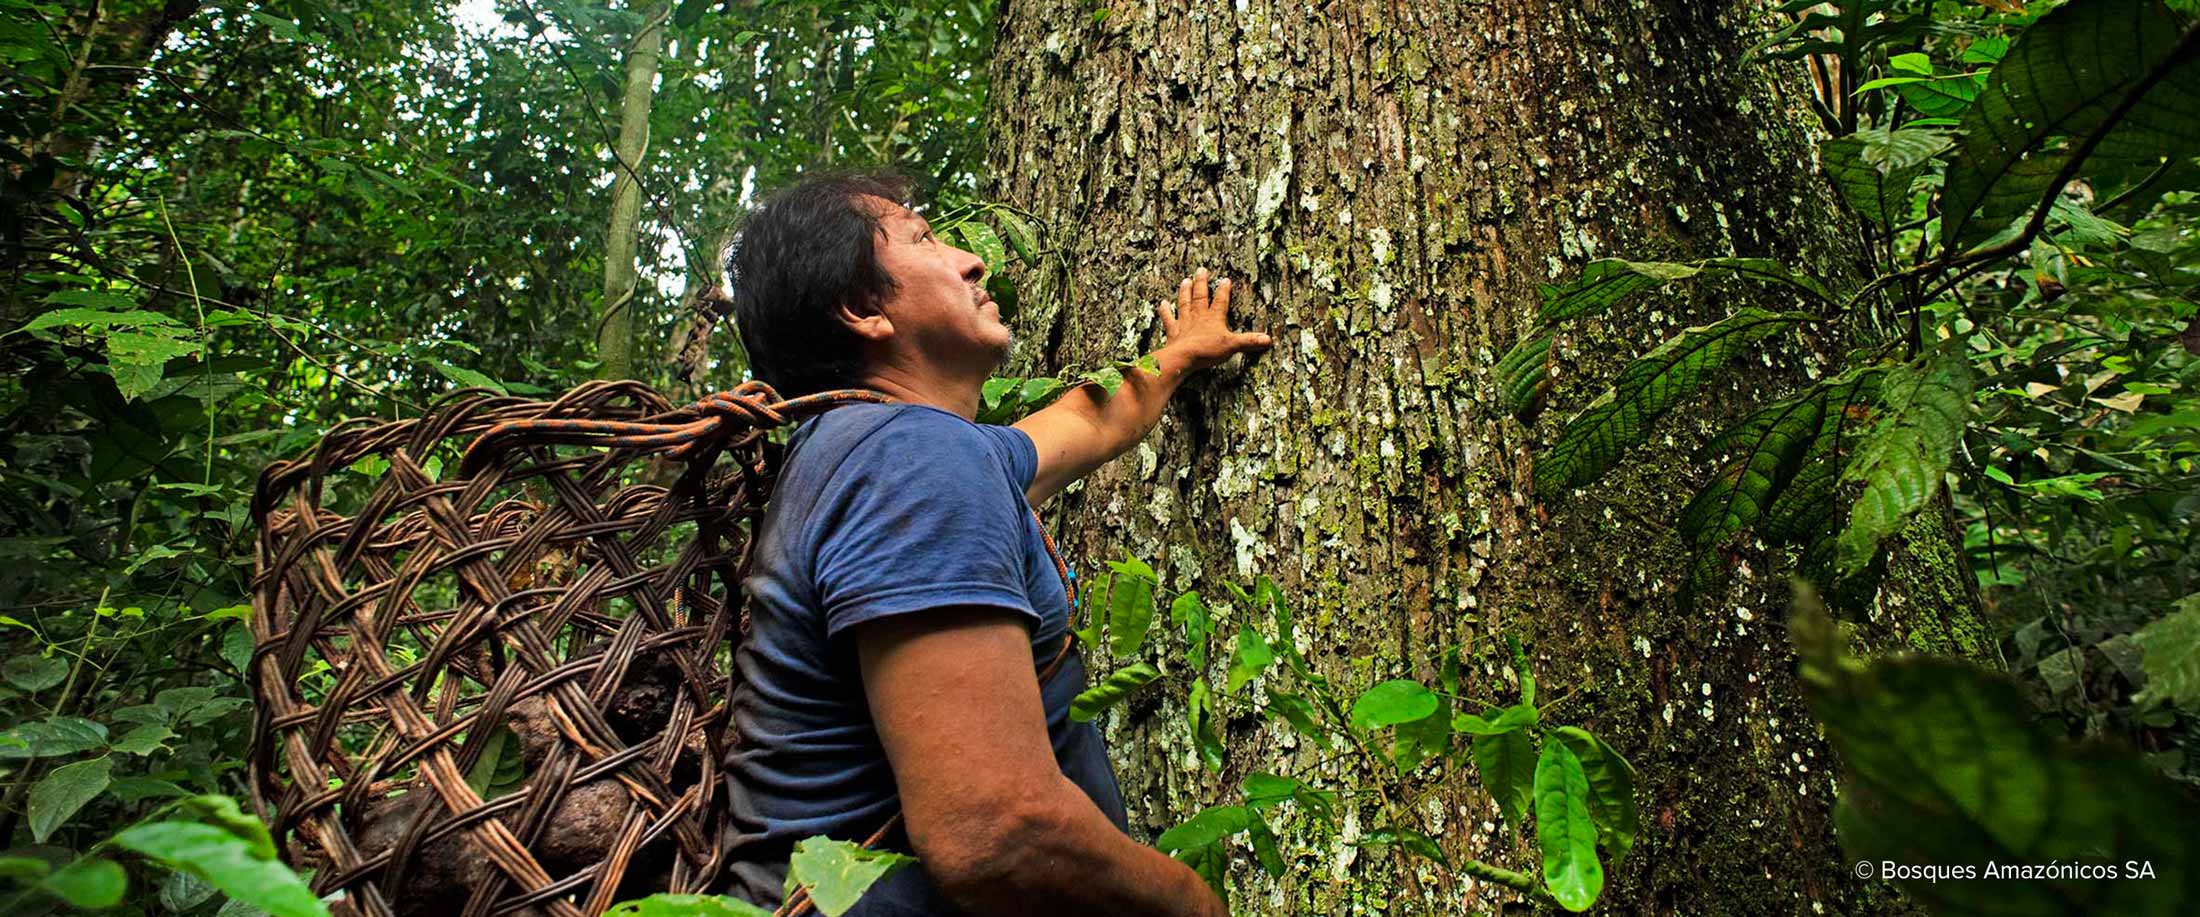 Brazil nut collection in Madre de Dios, Peru carbon offset project